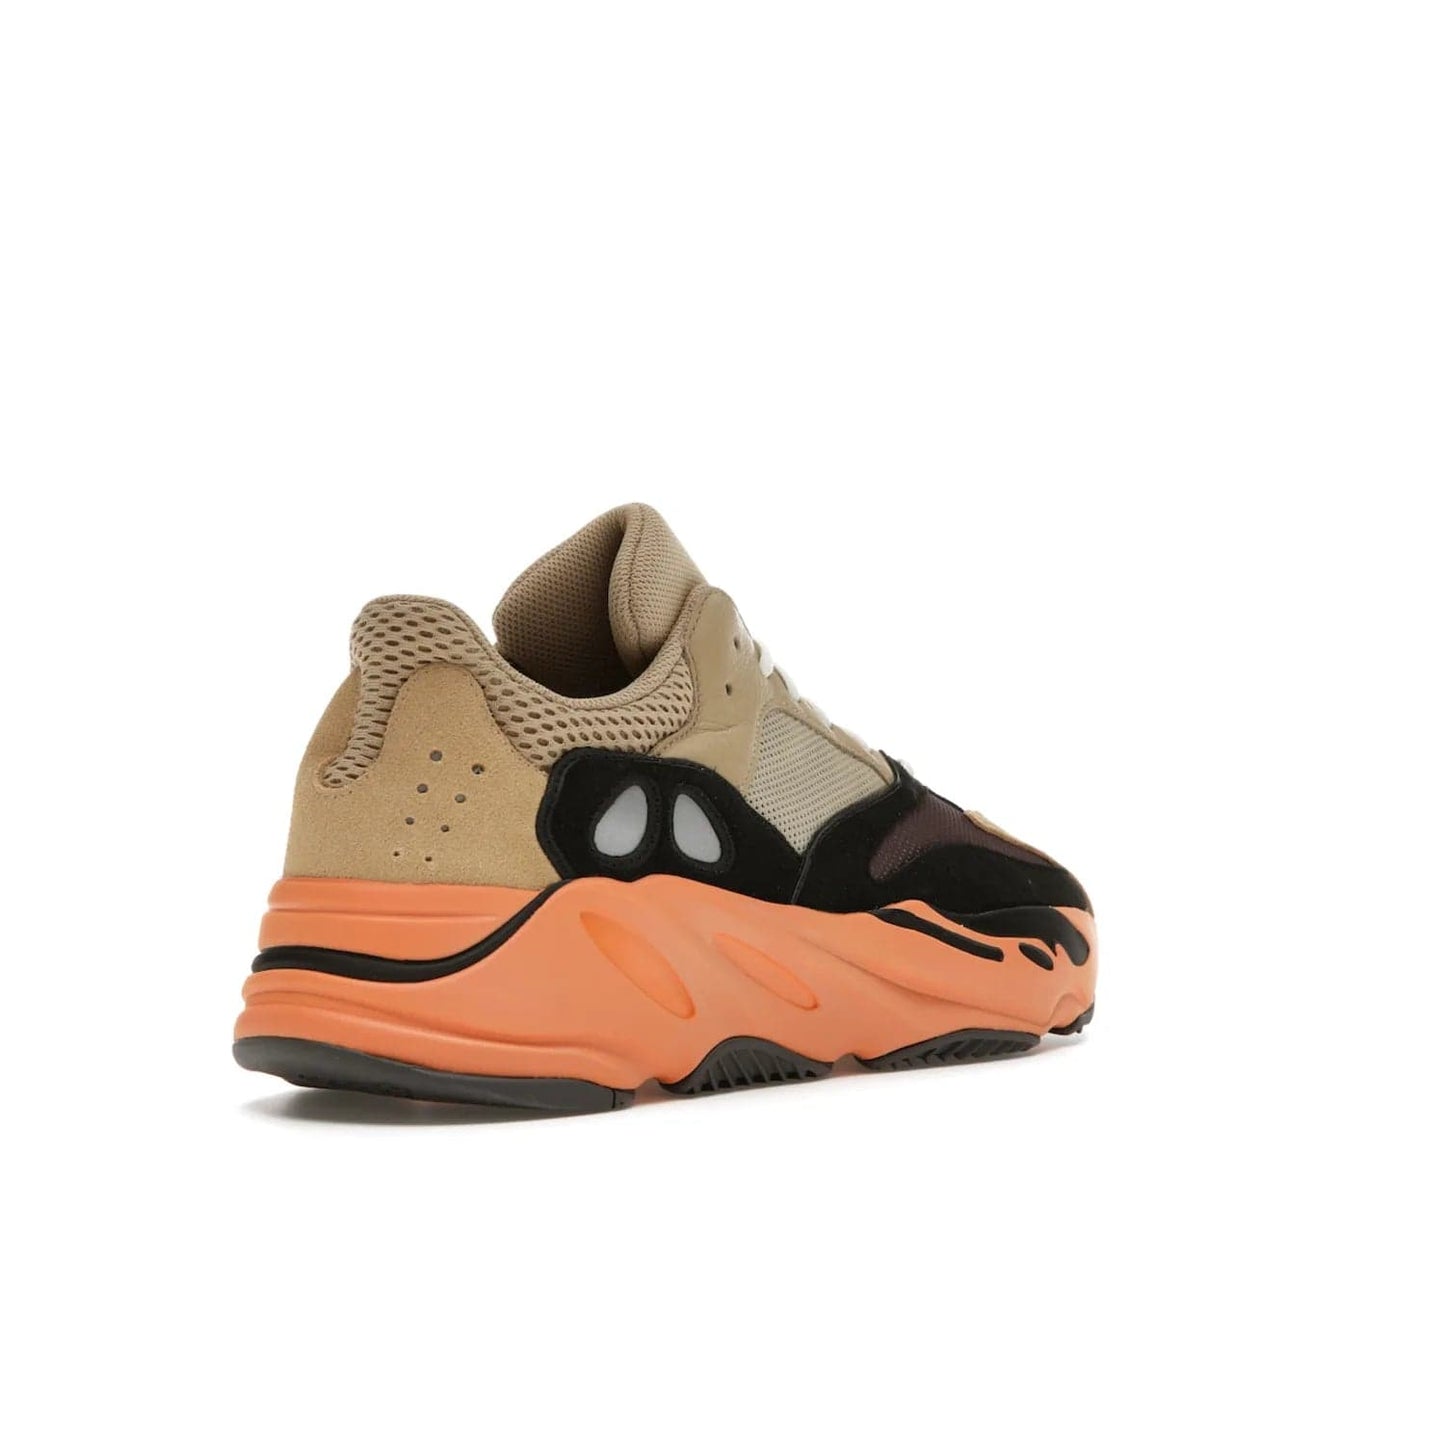 adidas Yeezy Boost 700 Enflame Amber - Image 32 - Only at www.BallersClubKickz.com - Adidas Yeezy Boost 700 Enflame Amber: Eye-catching design with pale yellow, brown, teal, and orange! Get yours in June 2021.